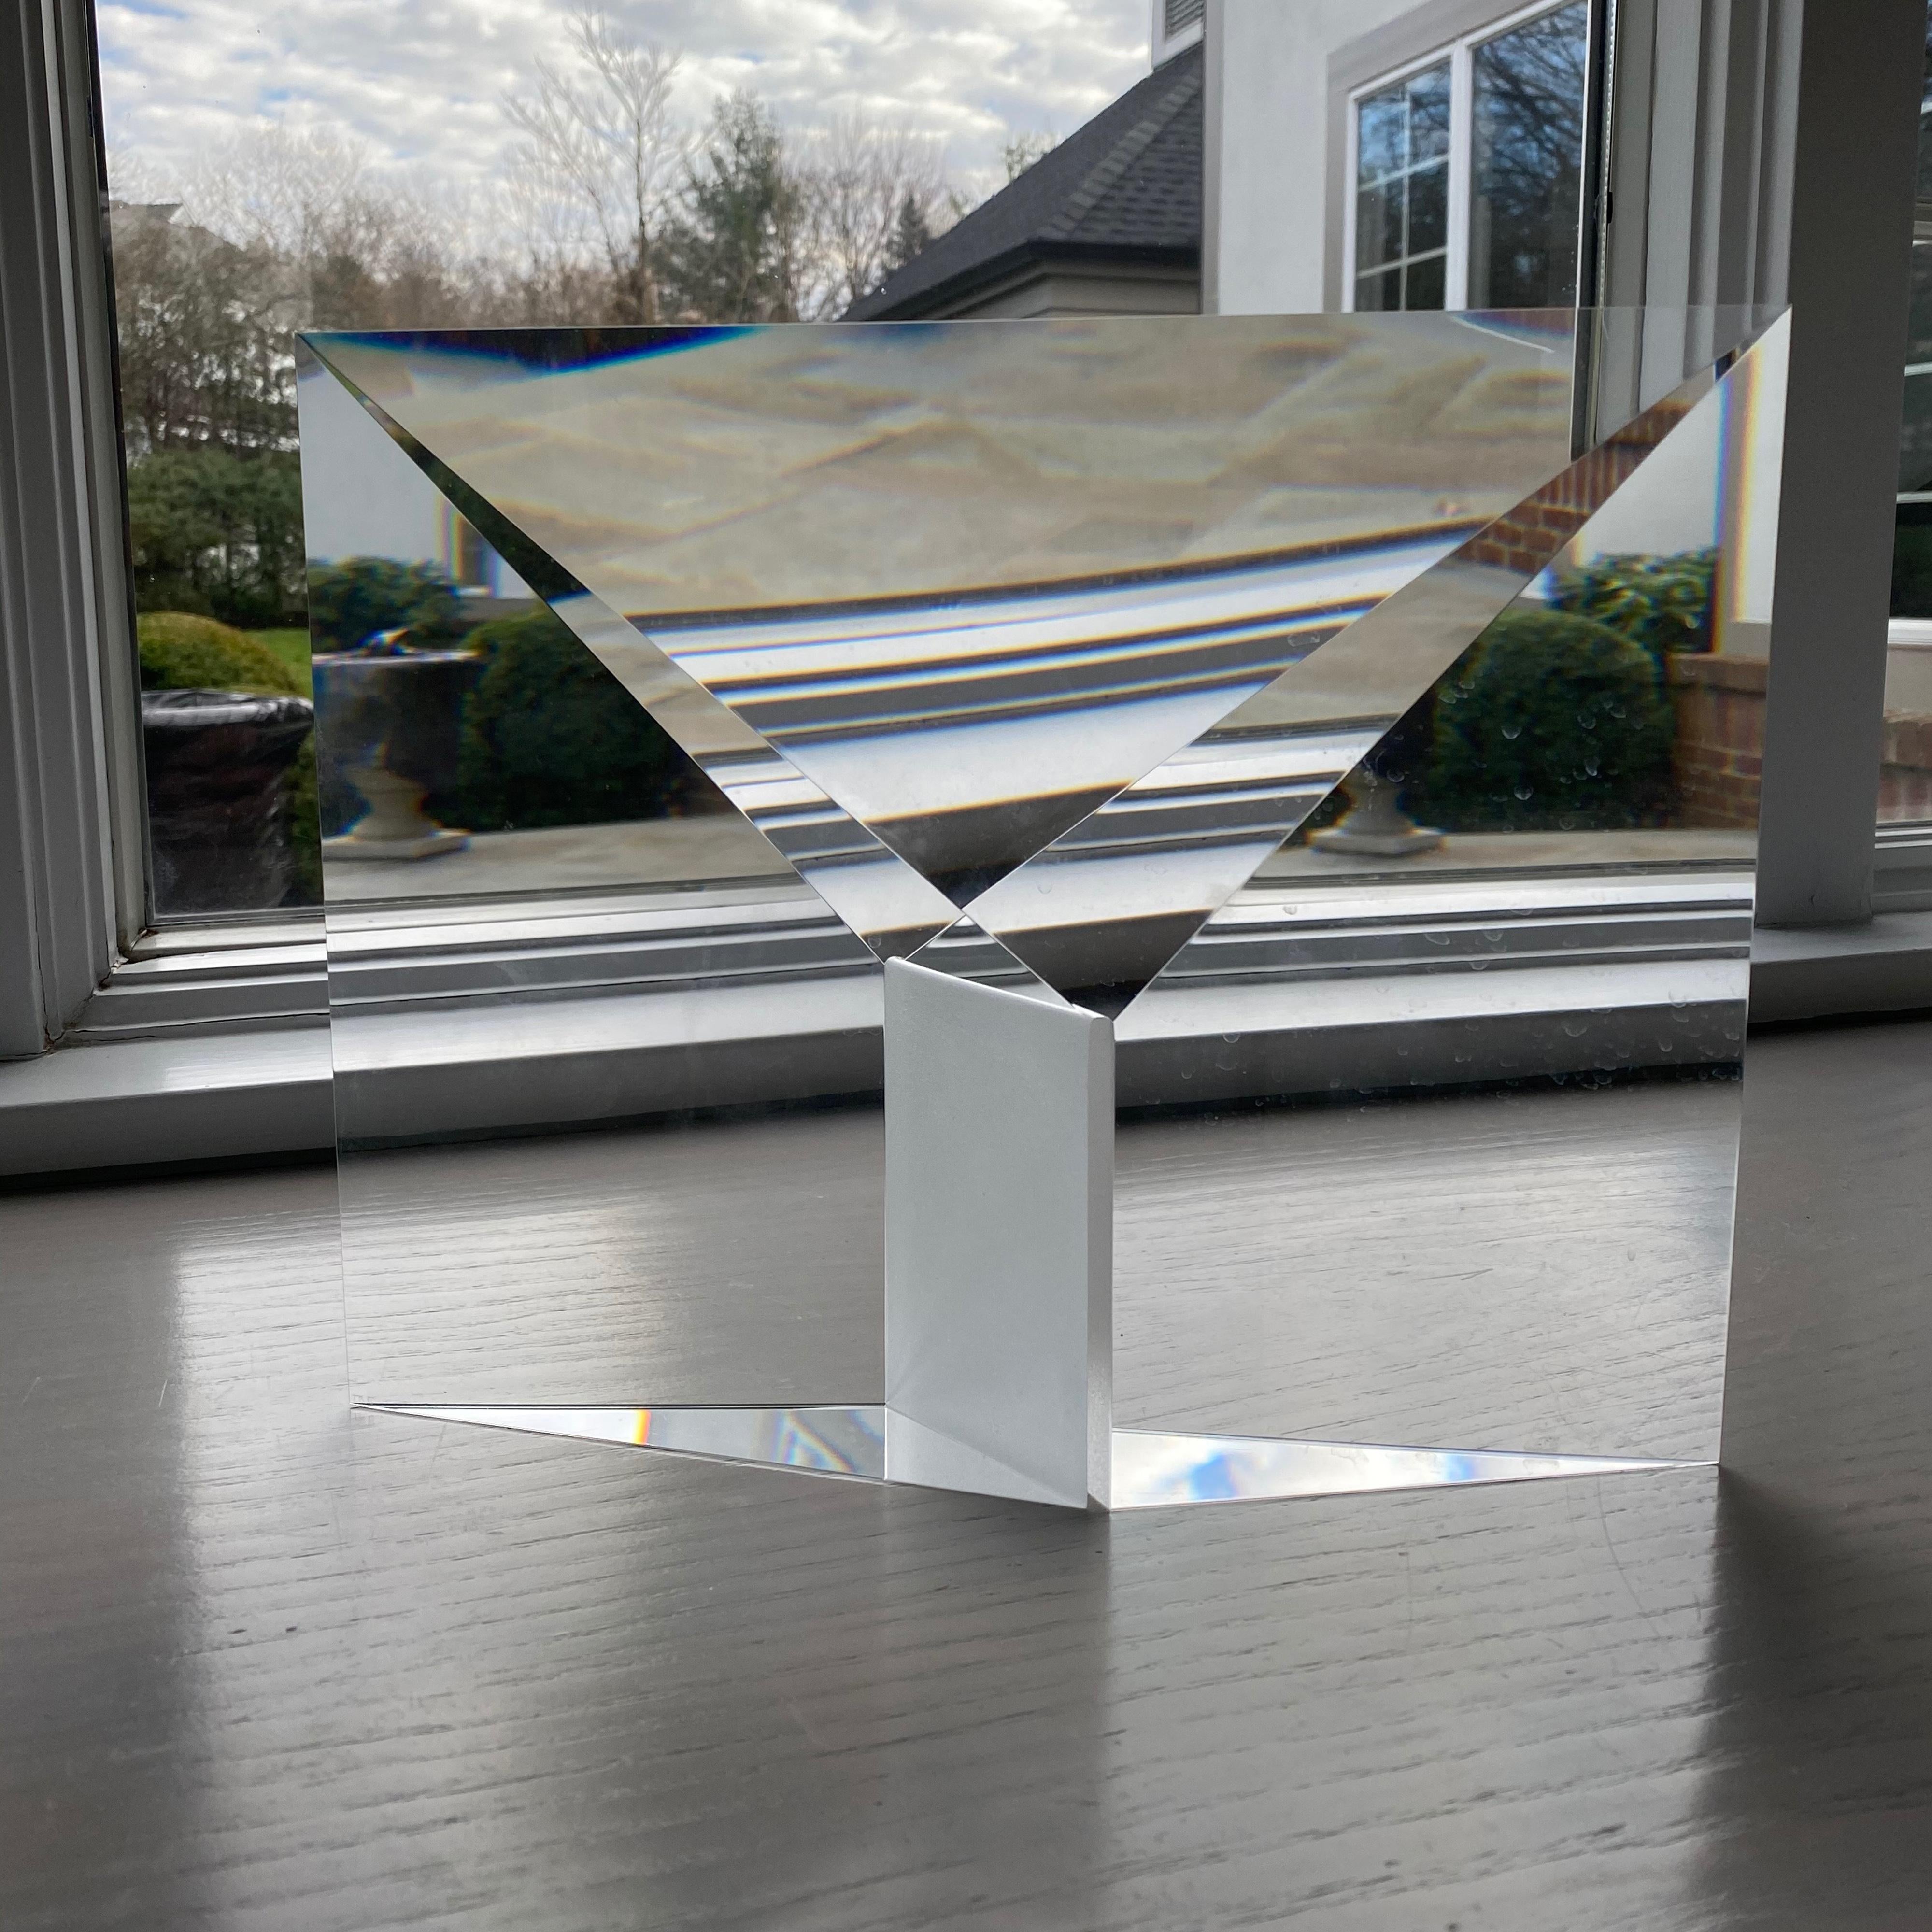 Tomas Brzon Abstract Sculpture - "Crystal Reflection" Cast, Cut, Polished, Optic Glass Sculpture